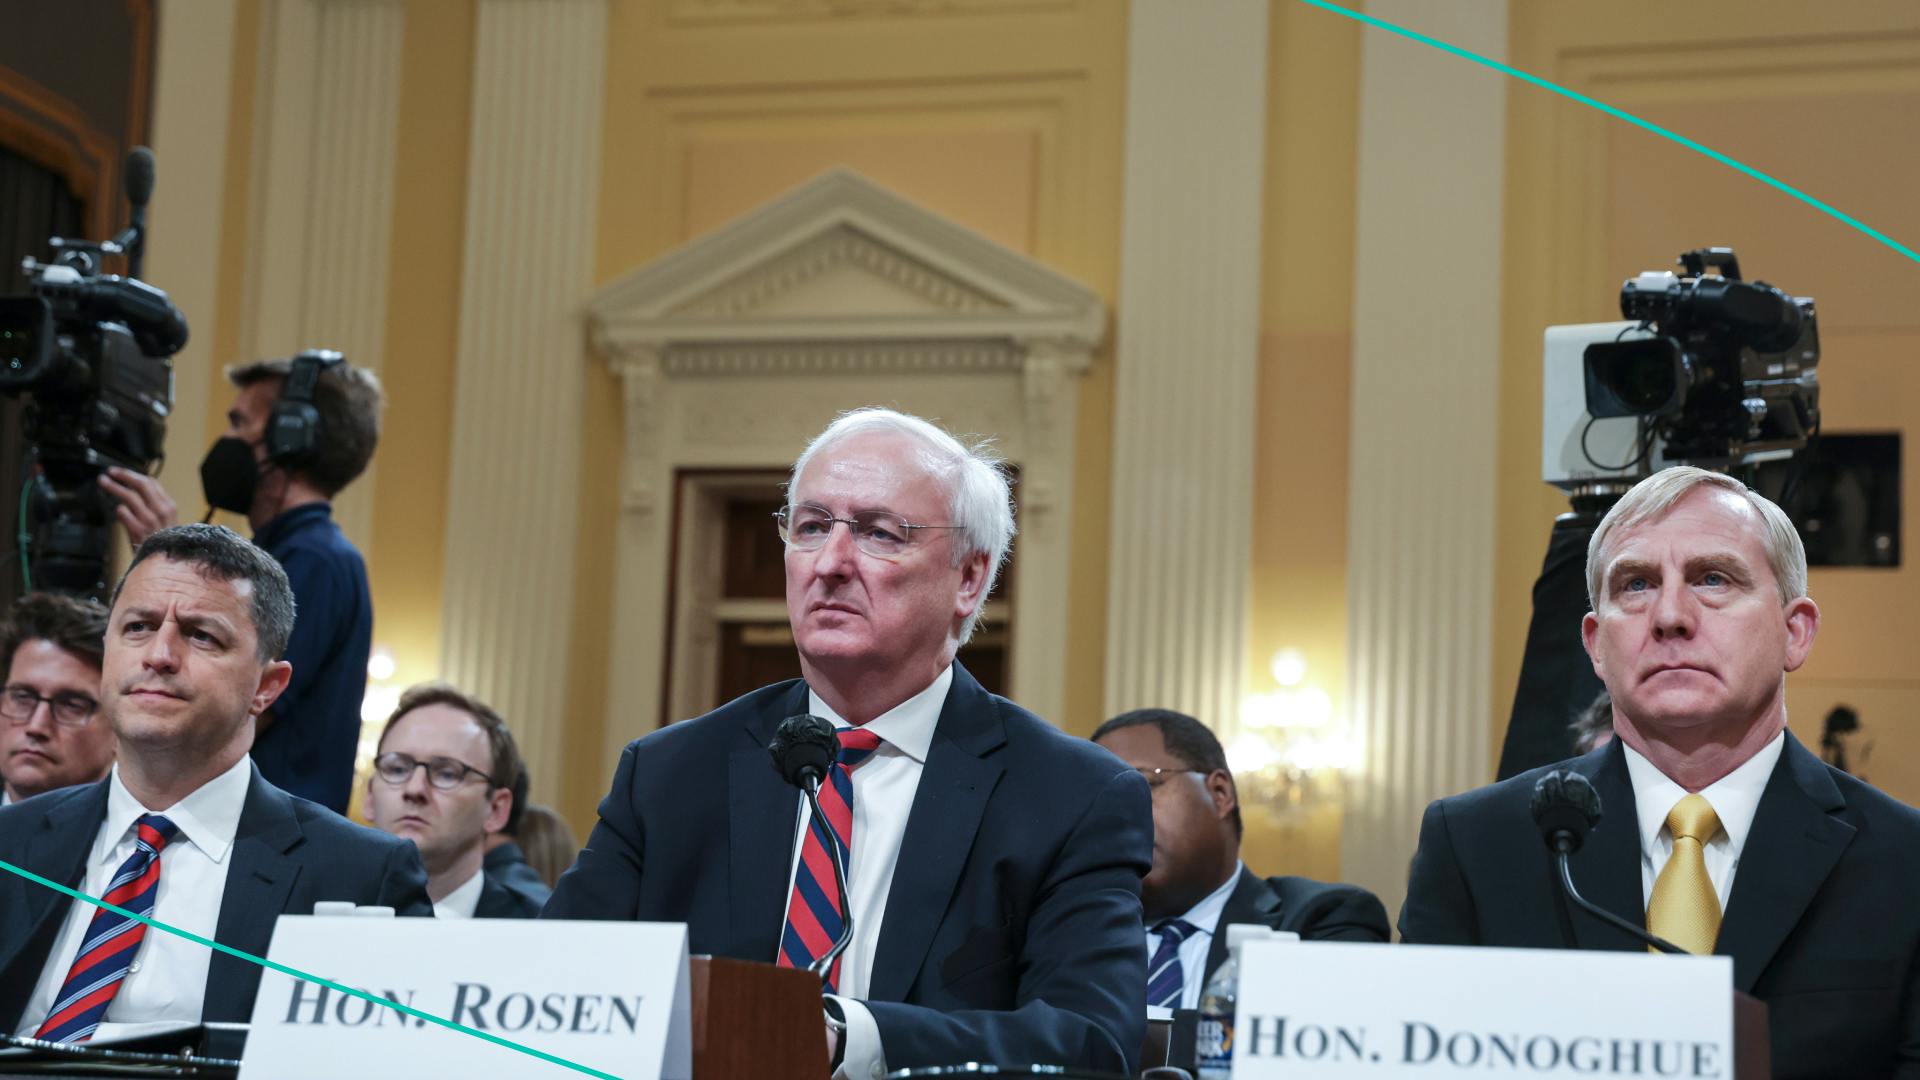 Steven Engel, former Assistant Attorney General for the Office of Legal Counsel, Jeffrey Rosen, former Acting Attorney General, and Richard Donoghue, former Acting Deputy Attorney General